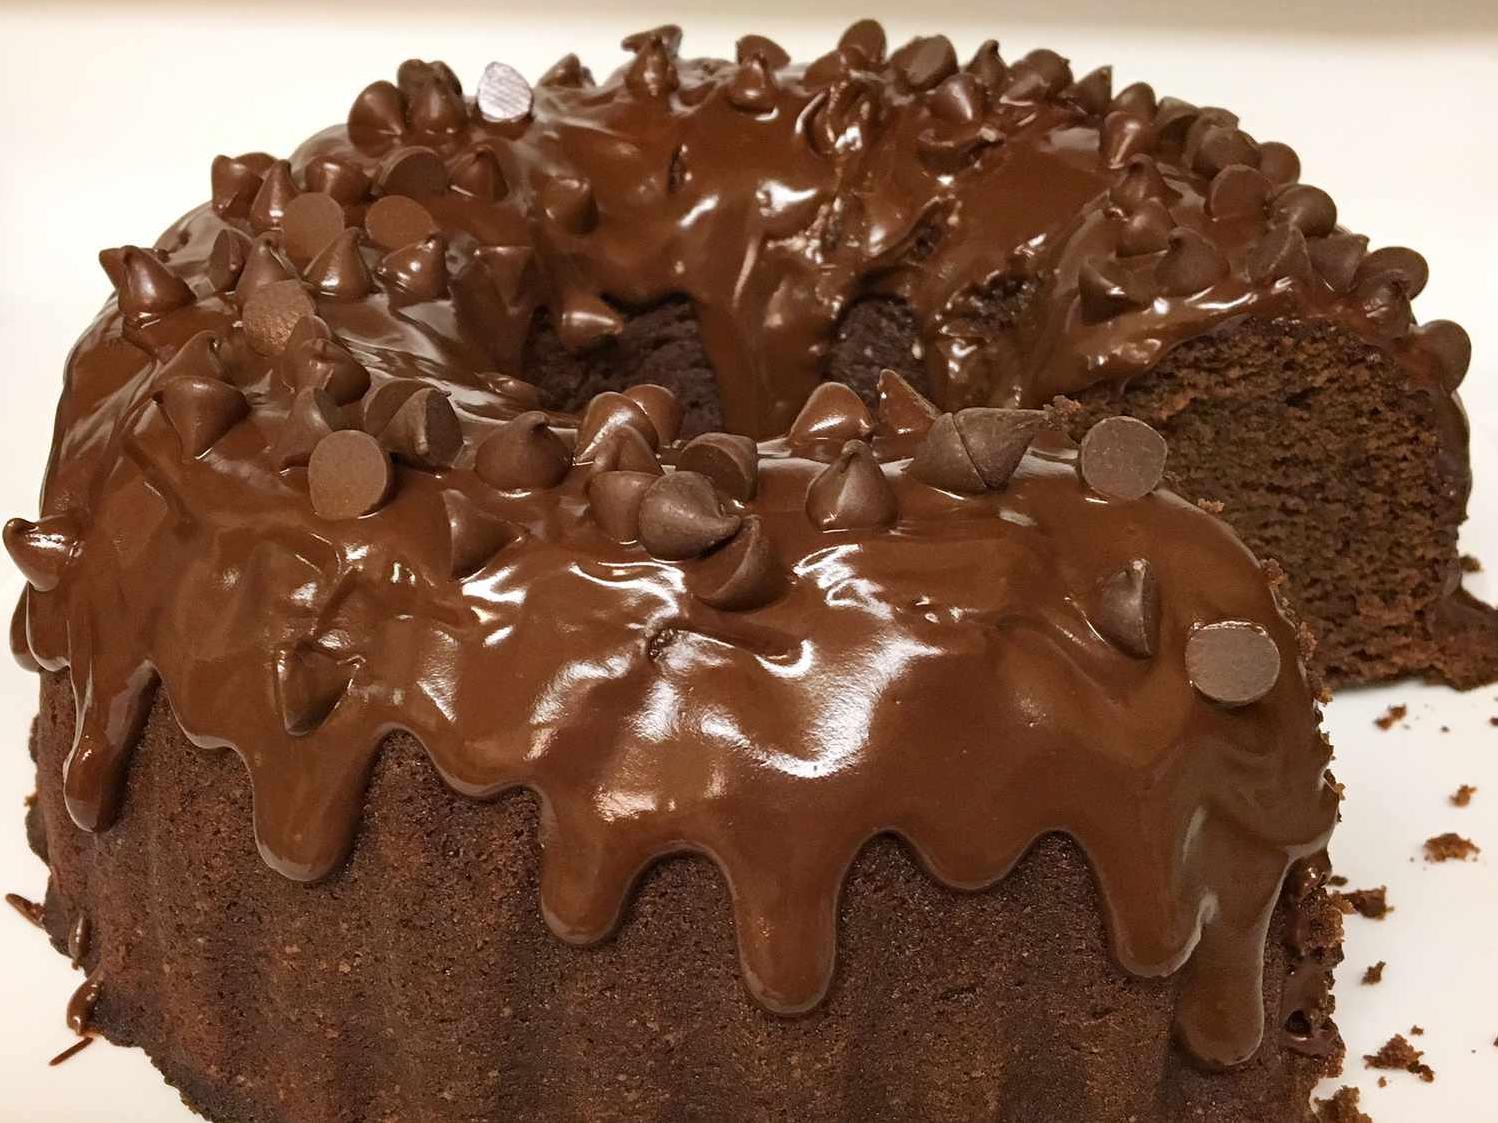  Get ready for a chocolatey explosion in your mouth!